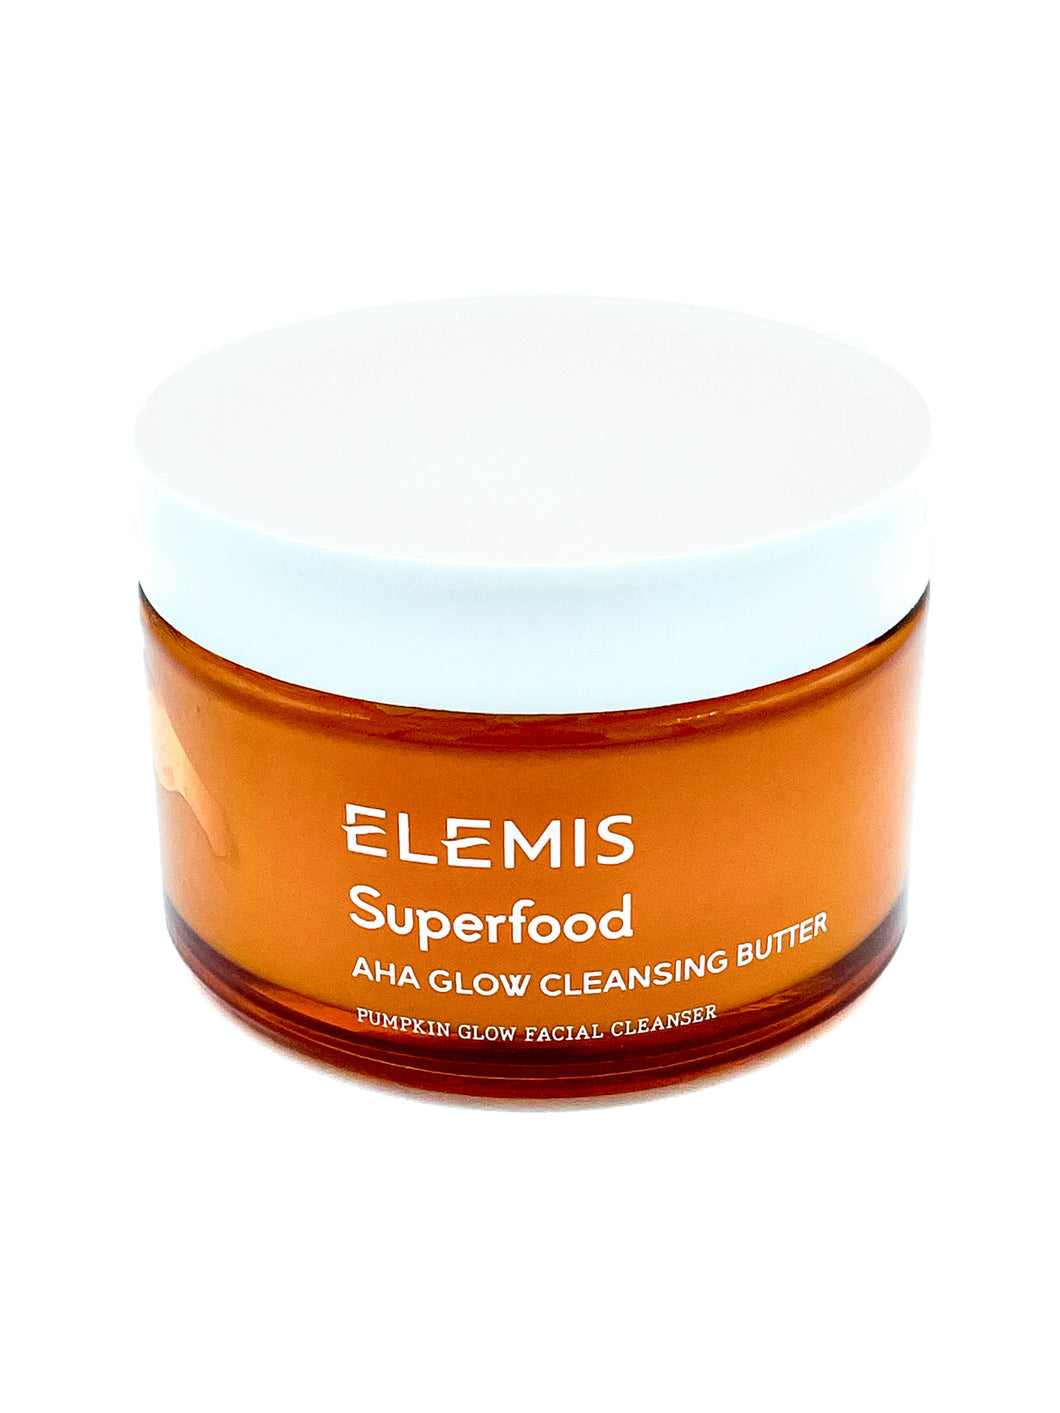 Elemis Superfood AHA Glow Cleansing Butter |  90g